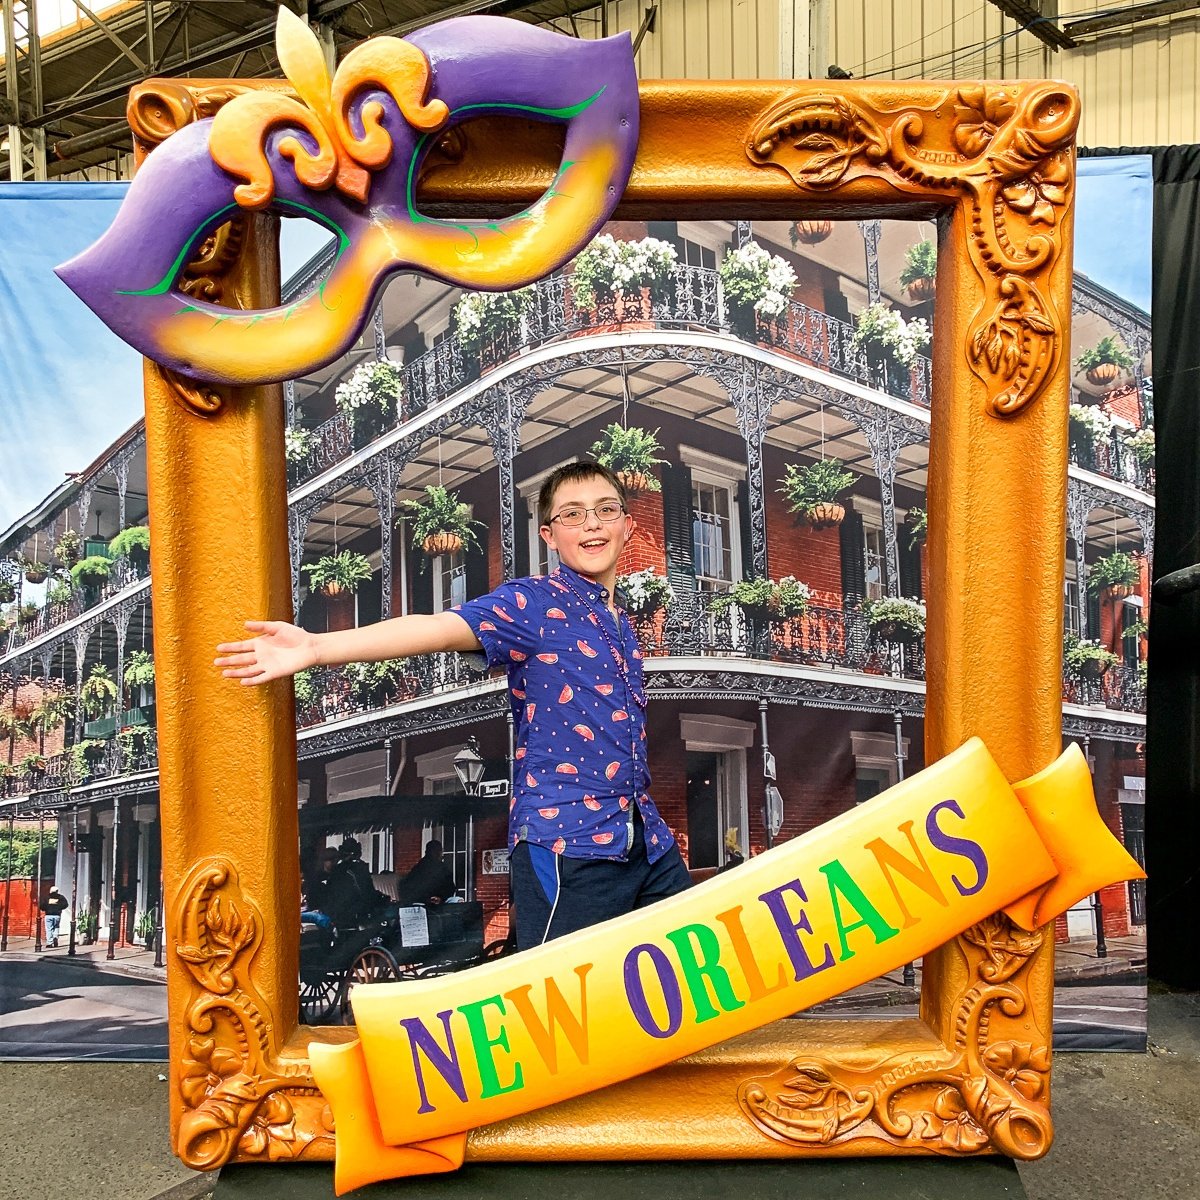 Mardi Gras World, just one of many fun things to do in New Orleans with kids